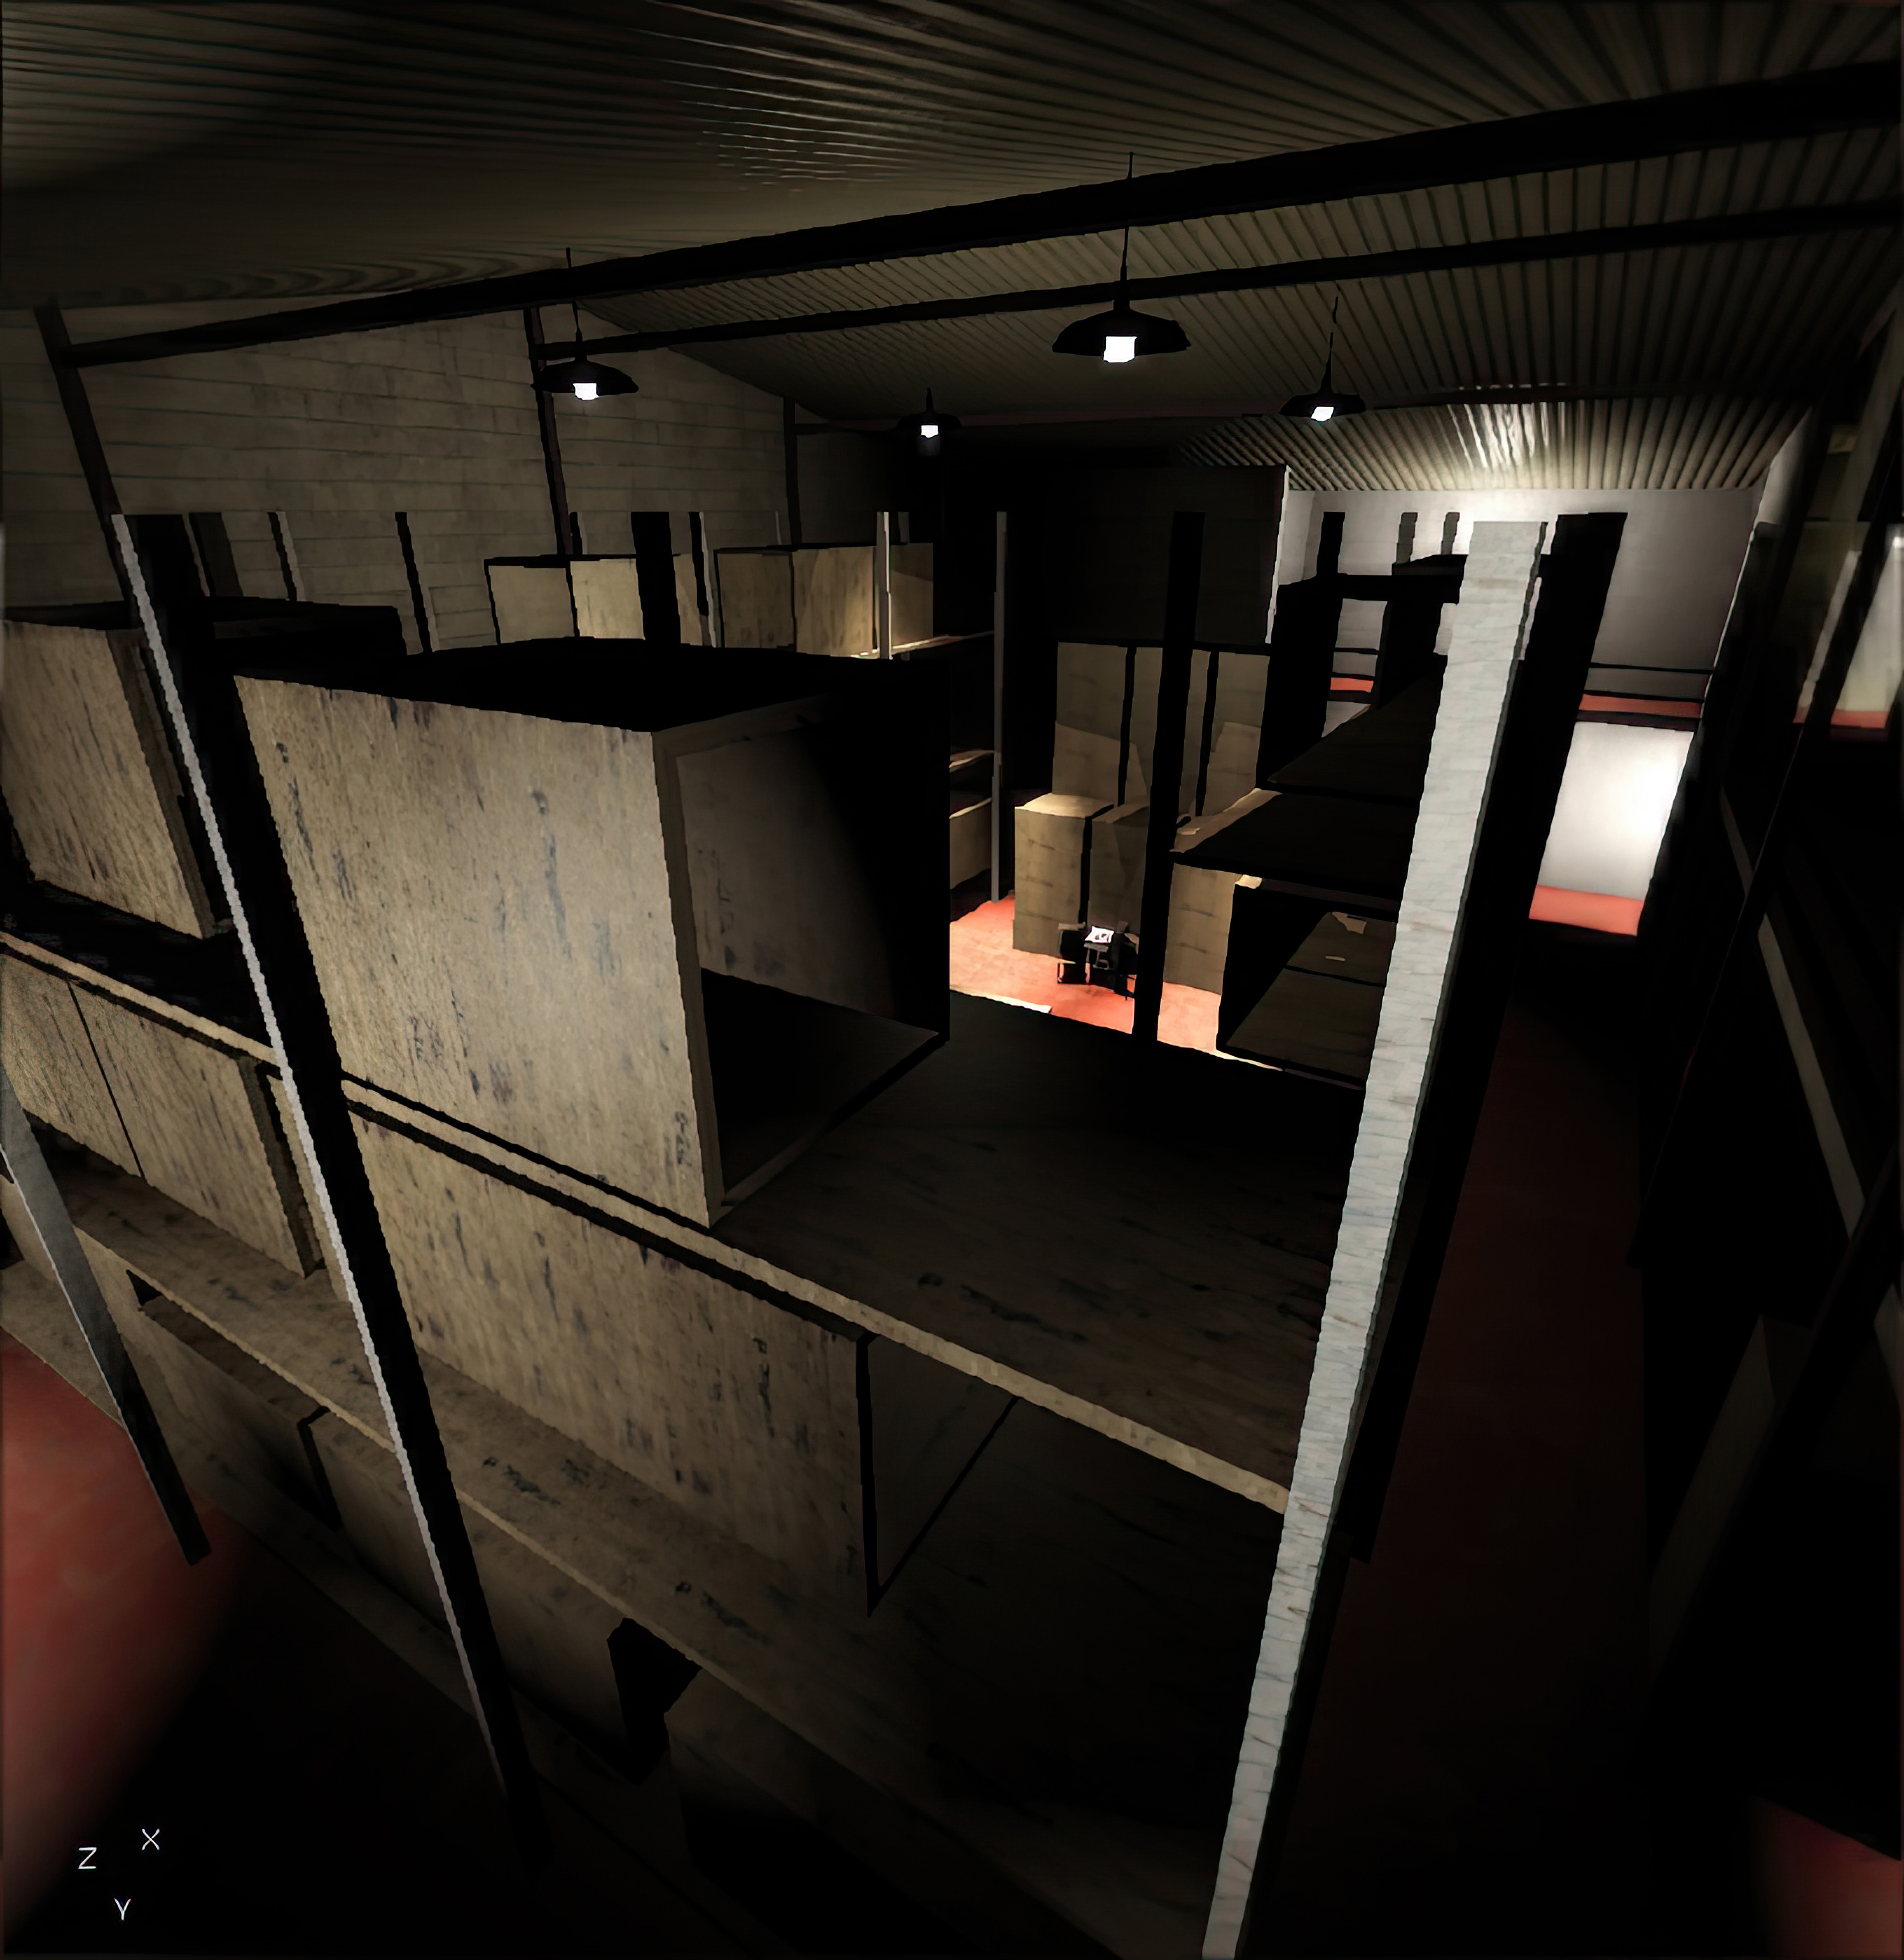 This is how this room looked like before i started working. Everything was done by Olivier Azemar [Level Designer].